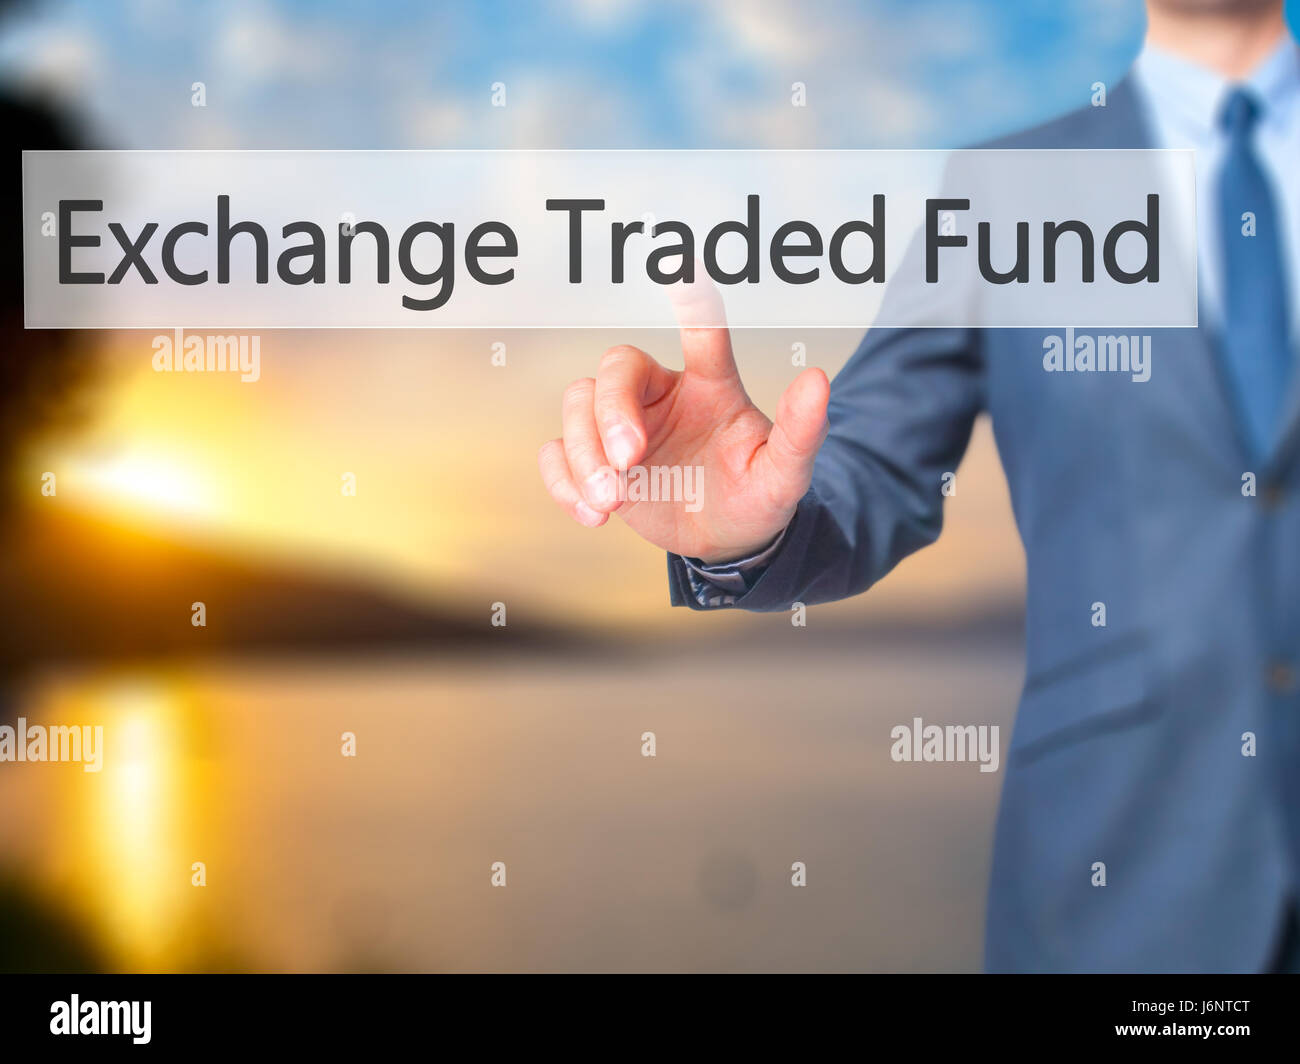 Exchange Traded Fund - Businessman hand pressing button on touch screen interface. Business, technology, internet concept. Stock Photo Stock Photo